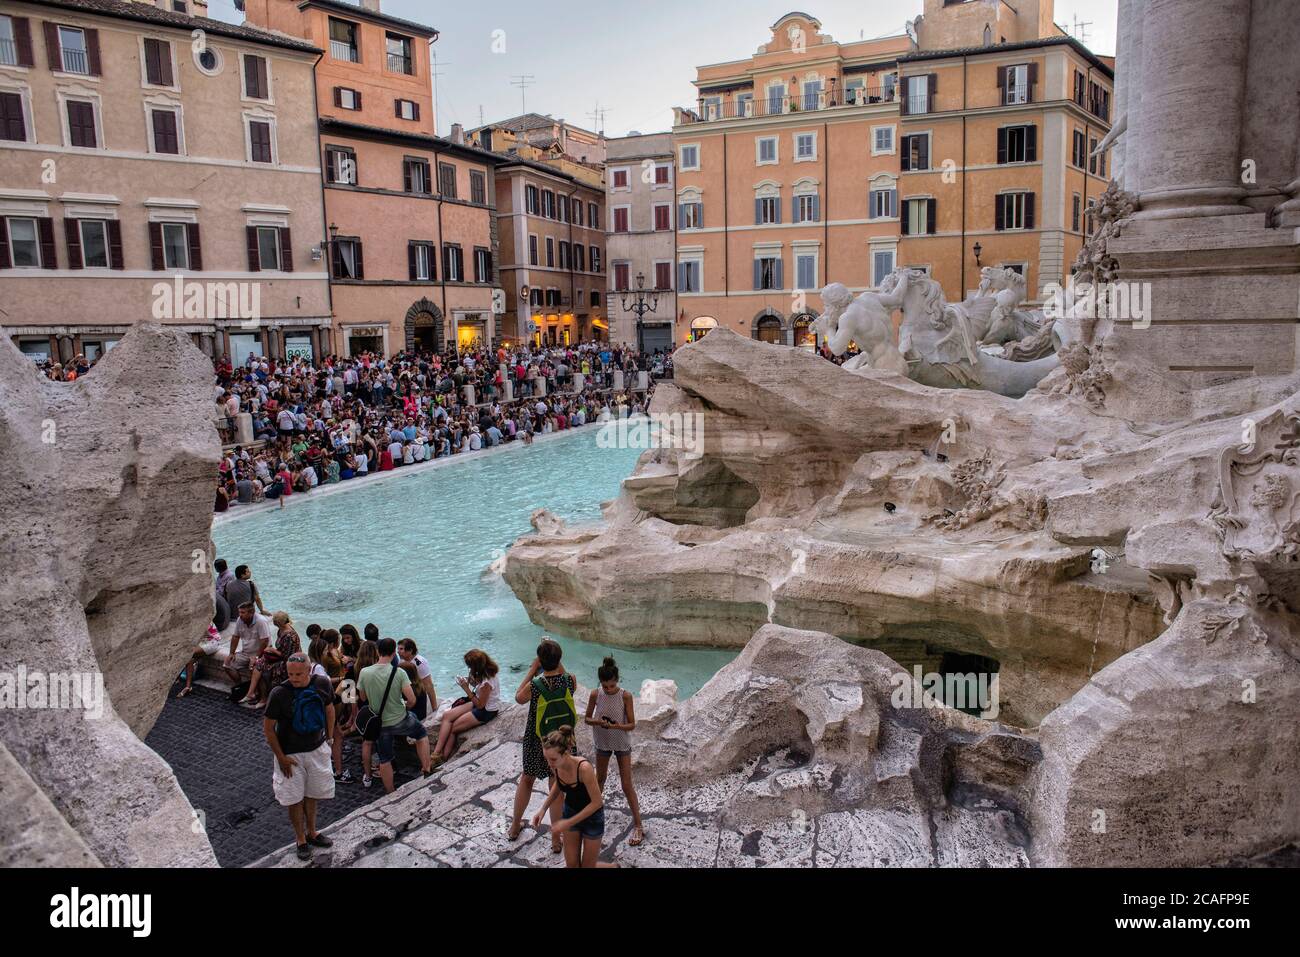 Europe - Italy, capital city Rome: Tourist at the Trevi Fountain which is one of the most popular spots in Rome, thousands of people visit the fountai Stock Photo